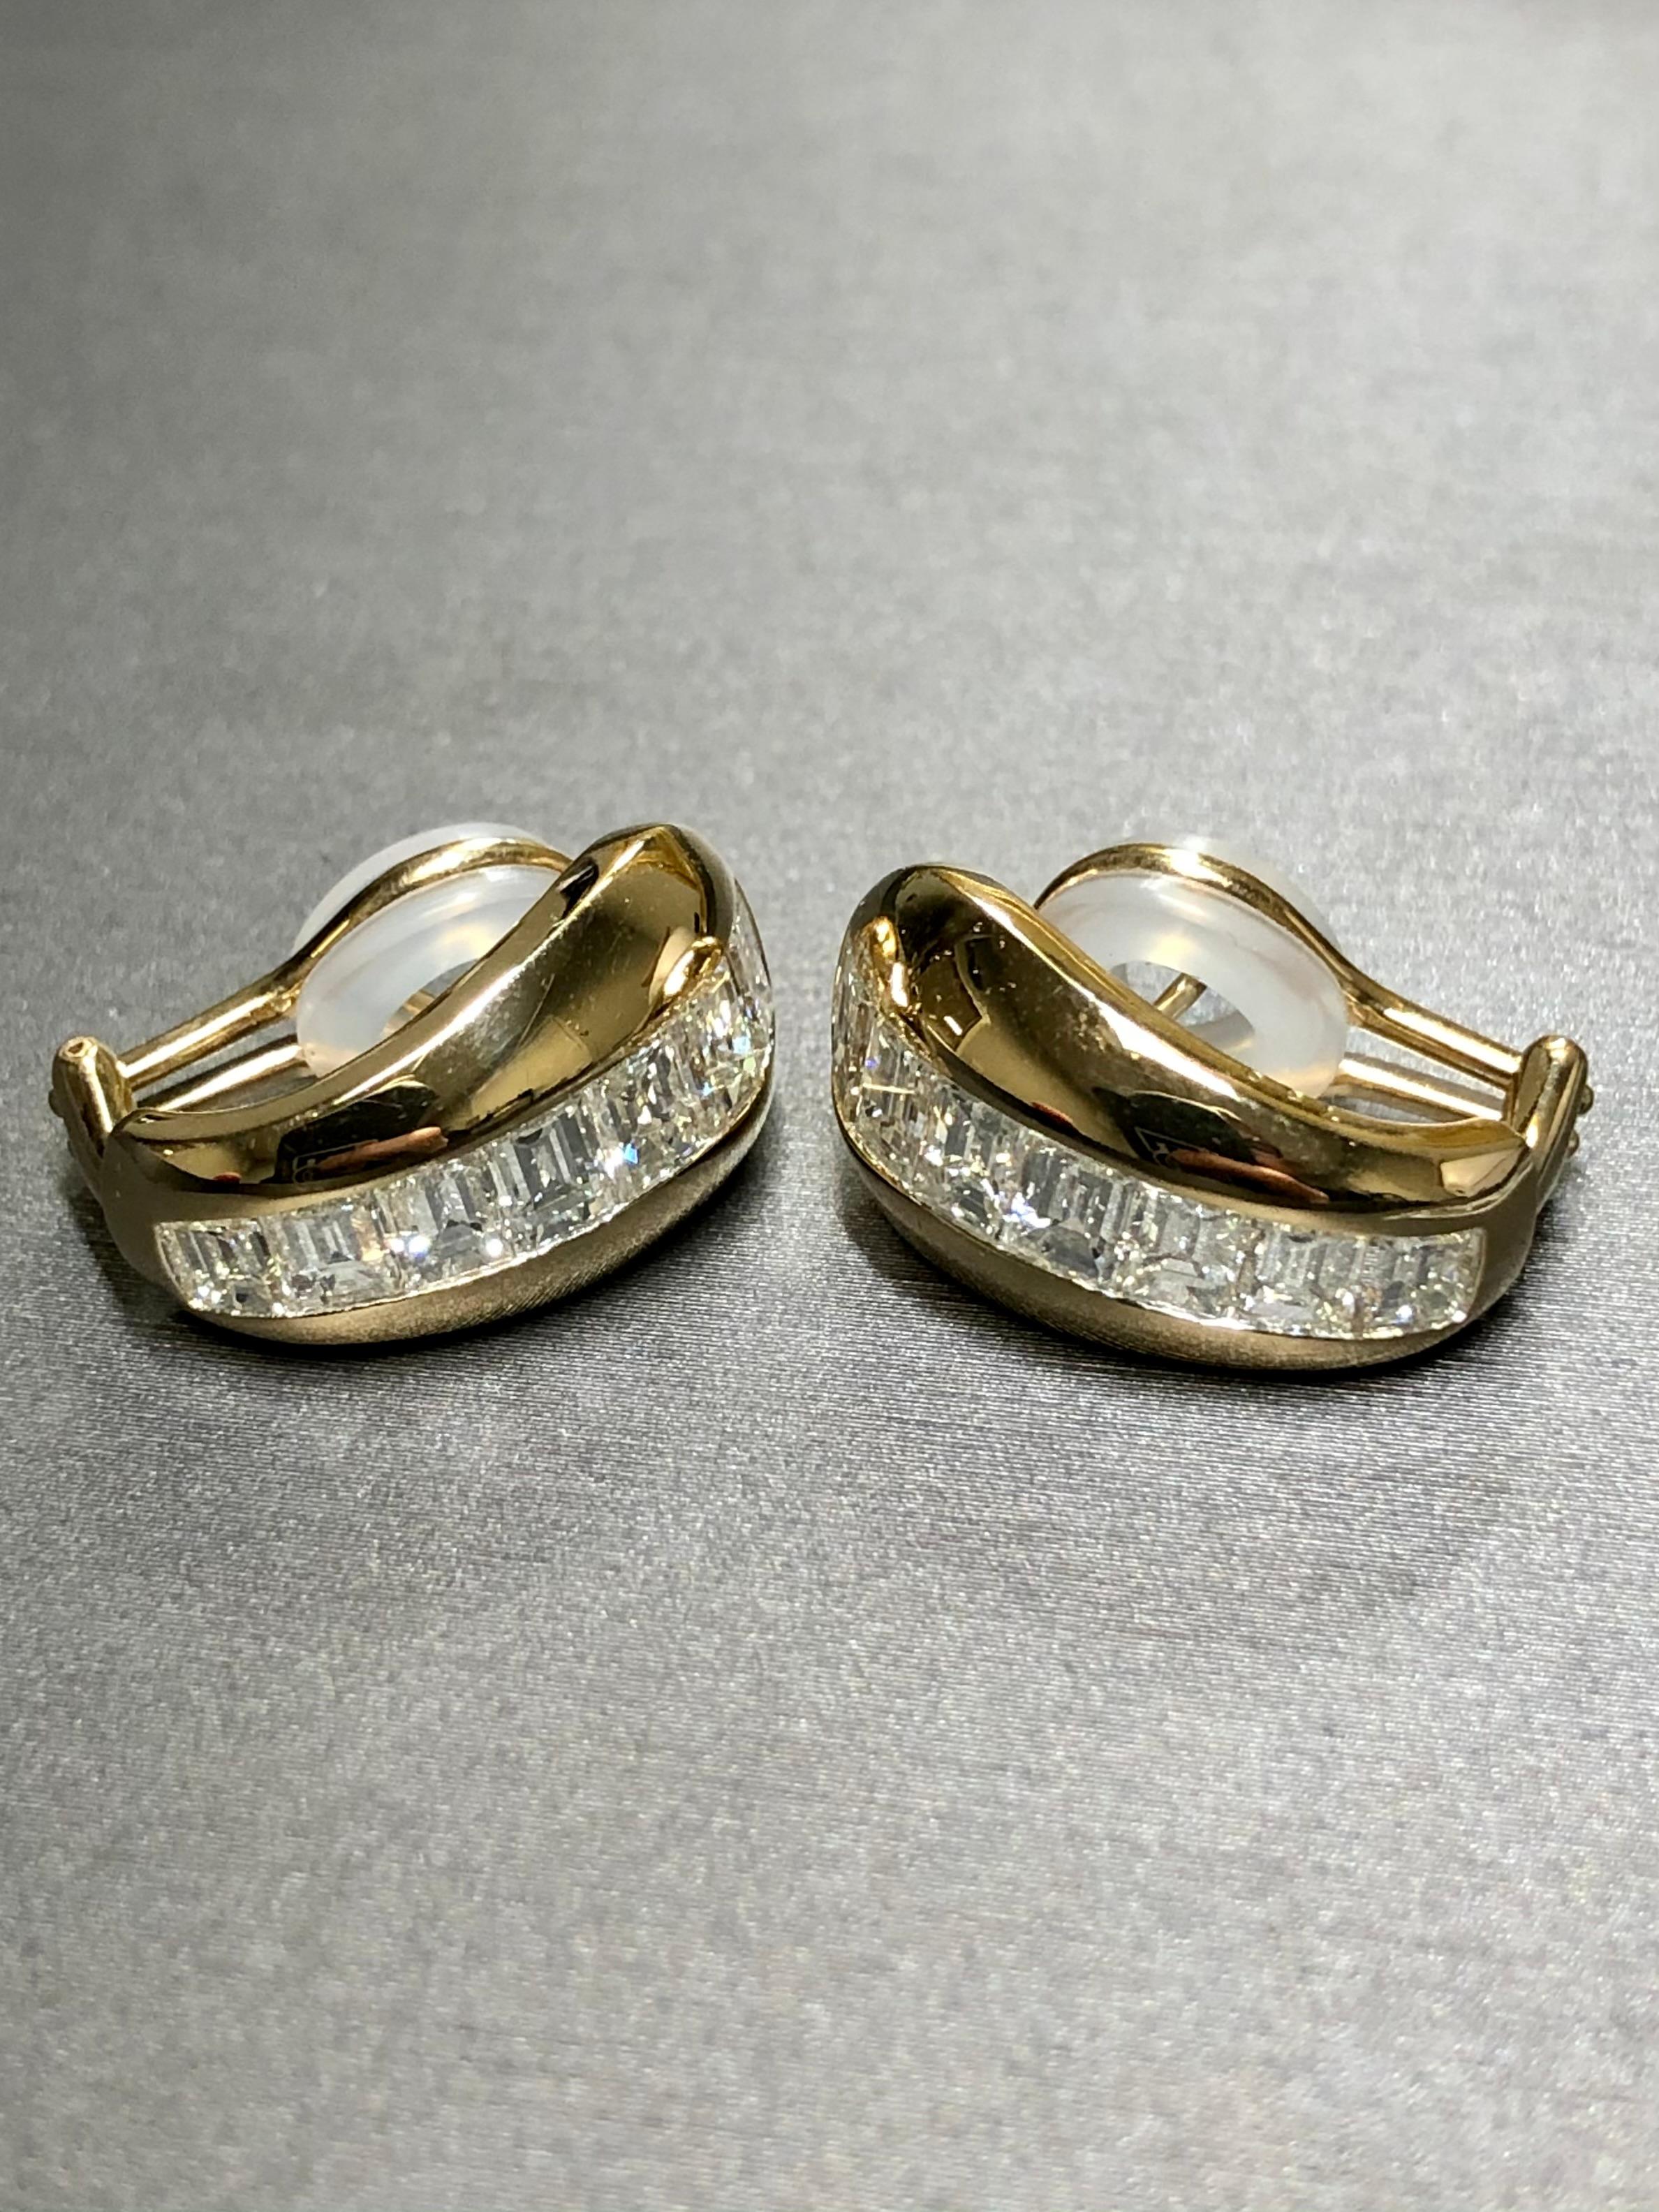 Estate 18K Yellow Gold Large Baguette Diamond Huggie Earrings G Vs In Excellent Condition For Sale In Winter Springs, FL